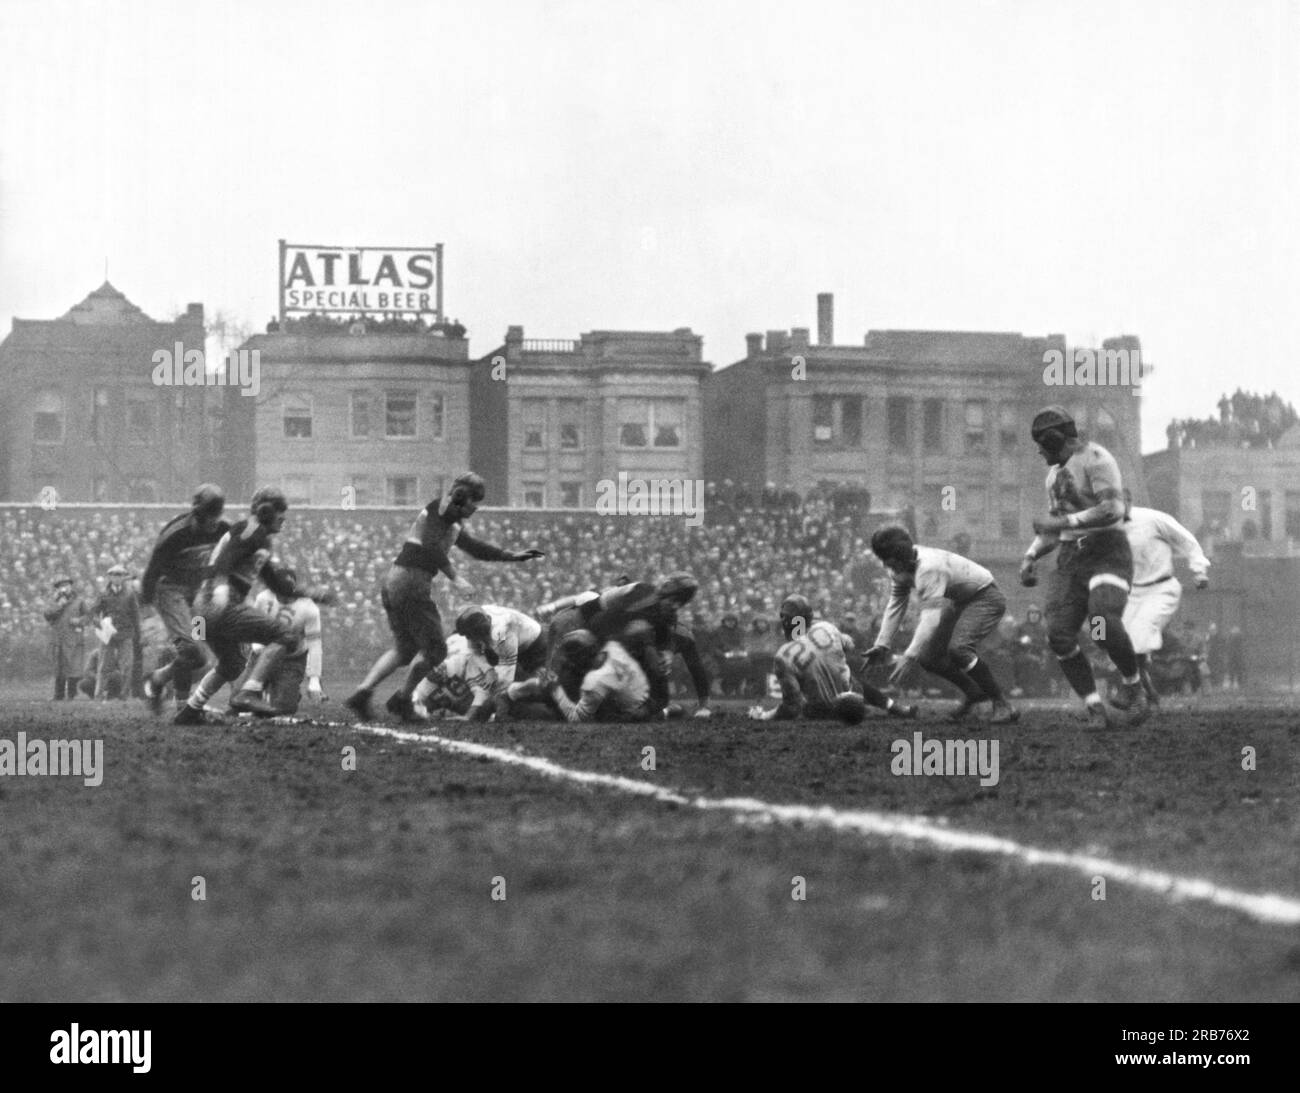 Chicago, Illinois:  December 17, 1933 The Chicago Bears recover their quarterback's fumble and go on to win the first scheduled NFL Football Championship game over the New York Giants at Wrigley Field in Chicago by a score of 23-21. Stock Photo